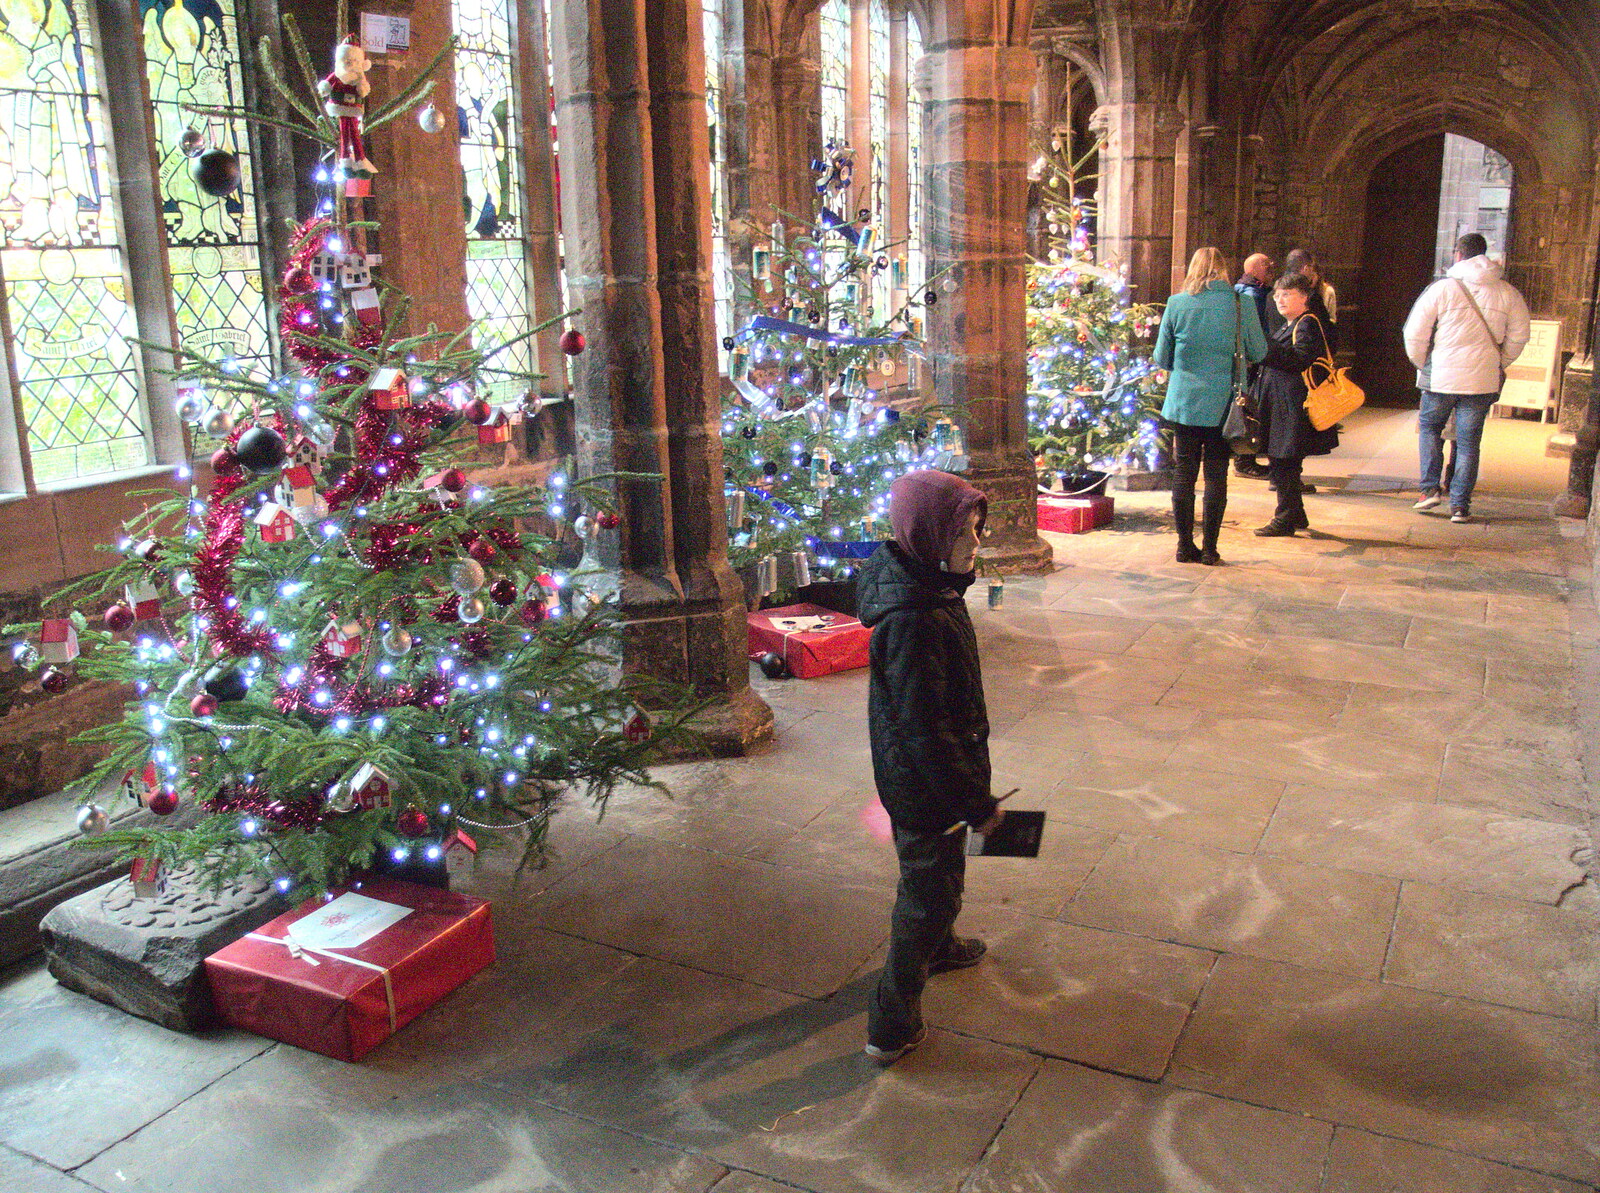 A Christmas Tree display in Chester Cathedral from A Party and a Road Trip to Chester, Suffolk and Cheshire - 20th December 2015